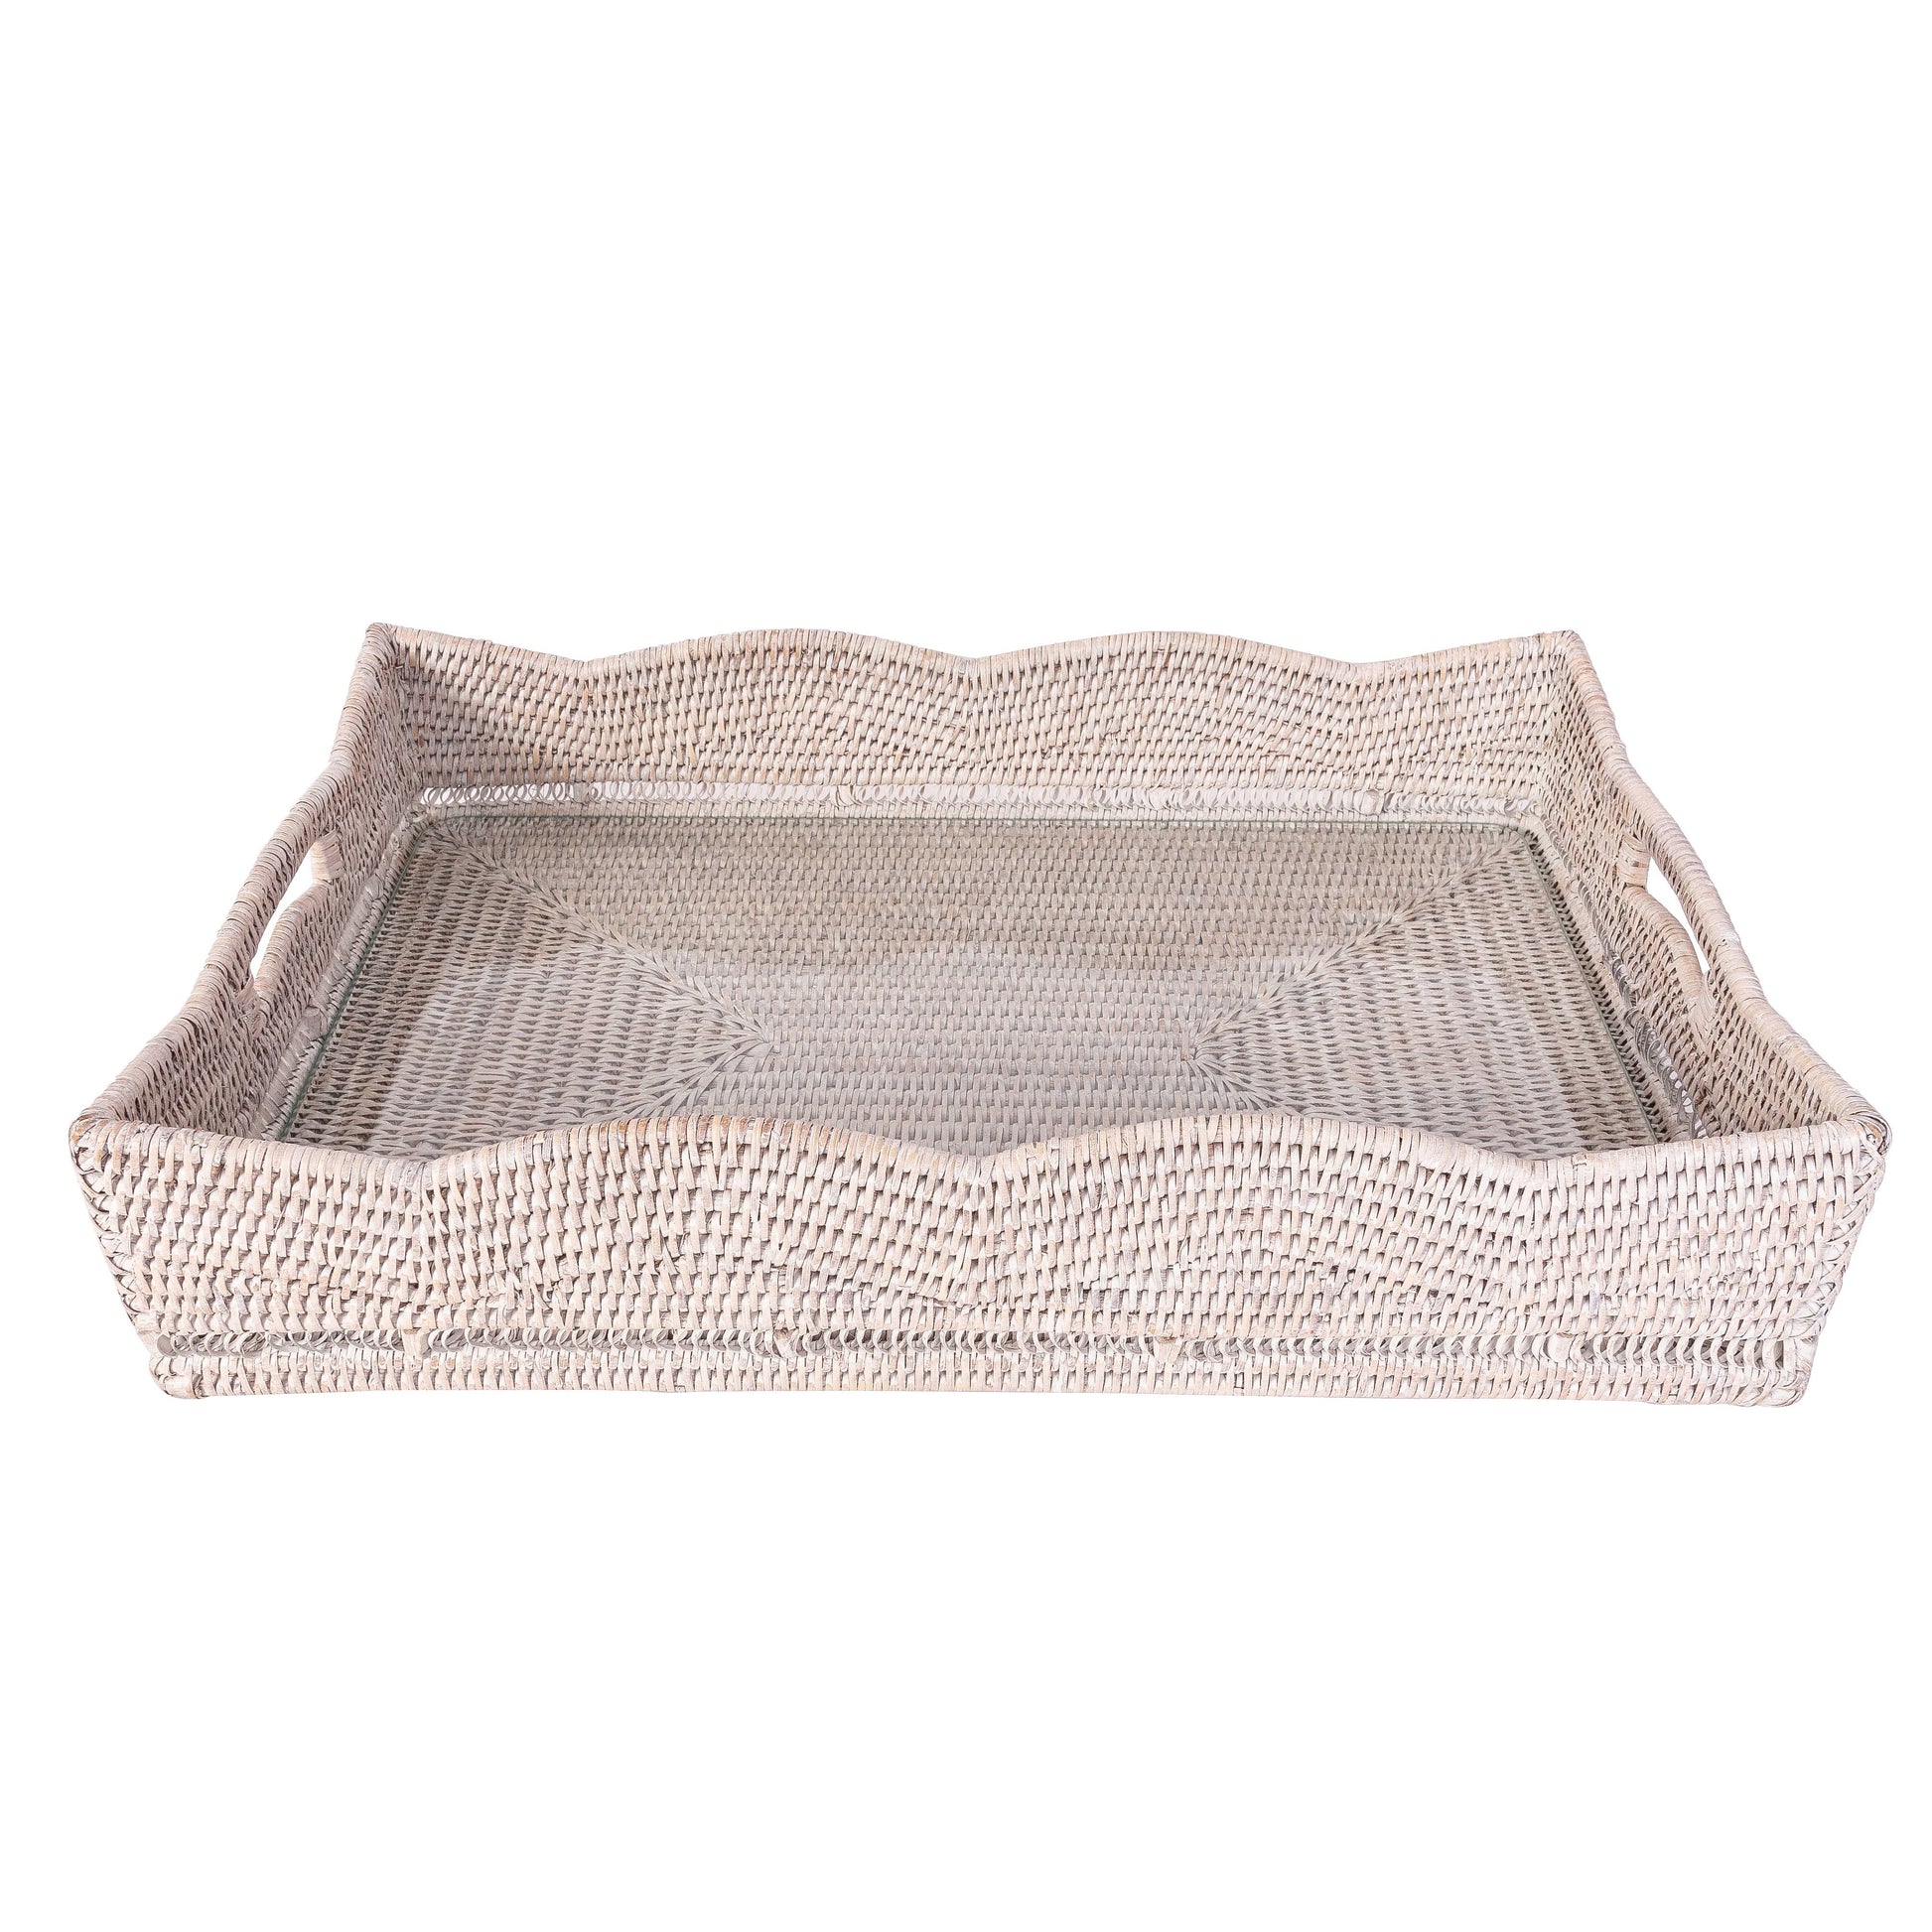 Scallop Rectangular Tray With Glass Insert - Crystal Conner Design